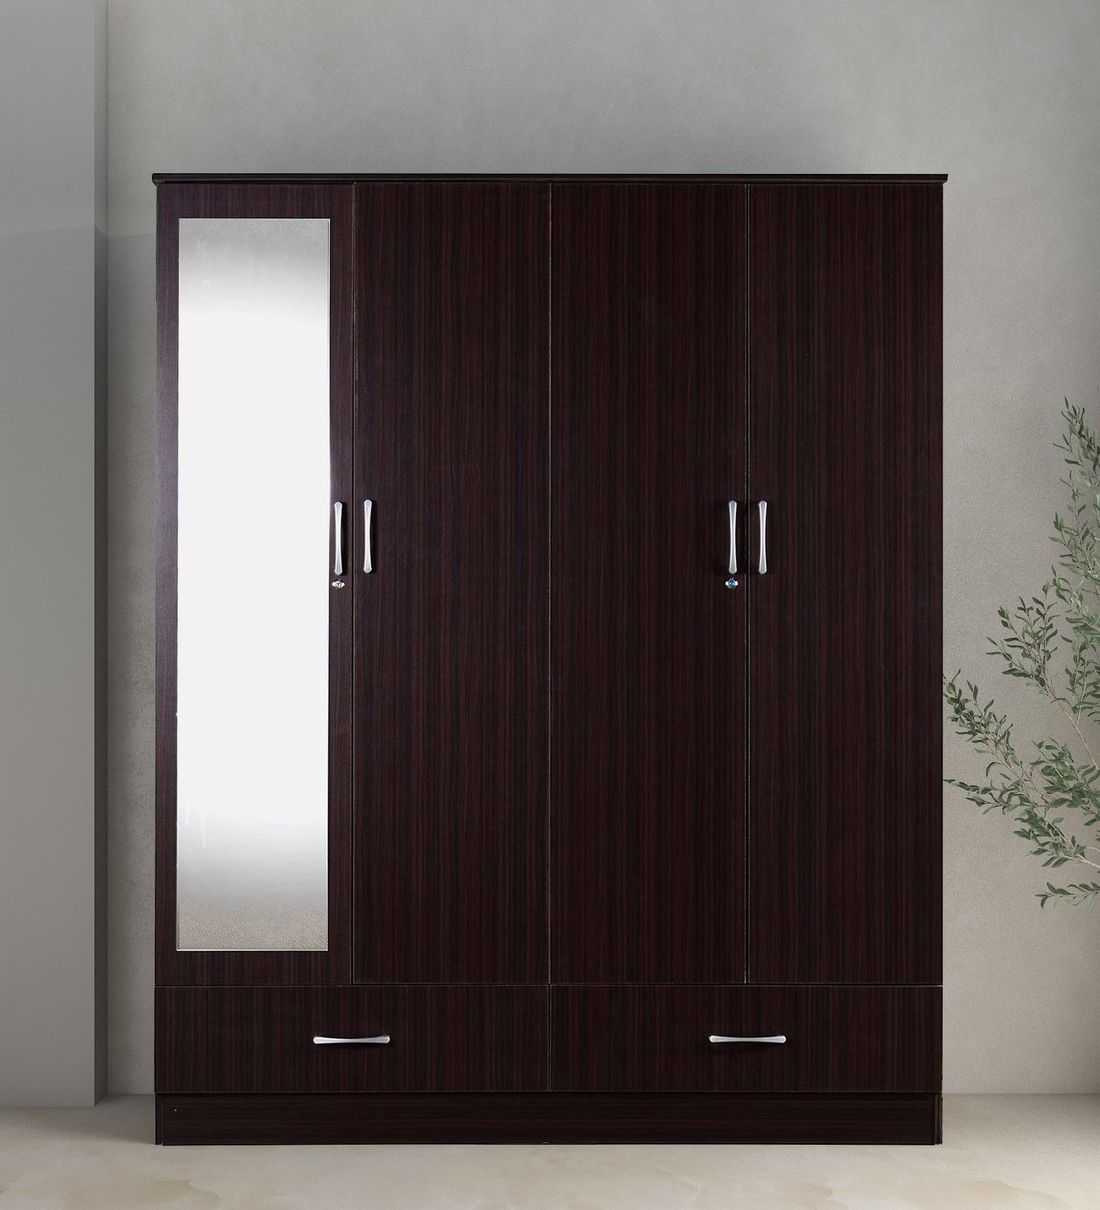 Buy Andes 4 Door Wardrobe With Mirror & Lock + Drawers In Wenge Finish At  29% Offmintwud From Pepperfry | Pepperfry With 4 Door Wardrobes With Mirror And Drawers (Gallery 17 of 20)